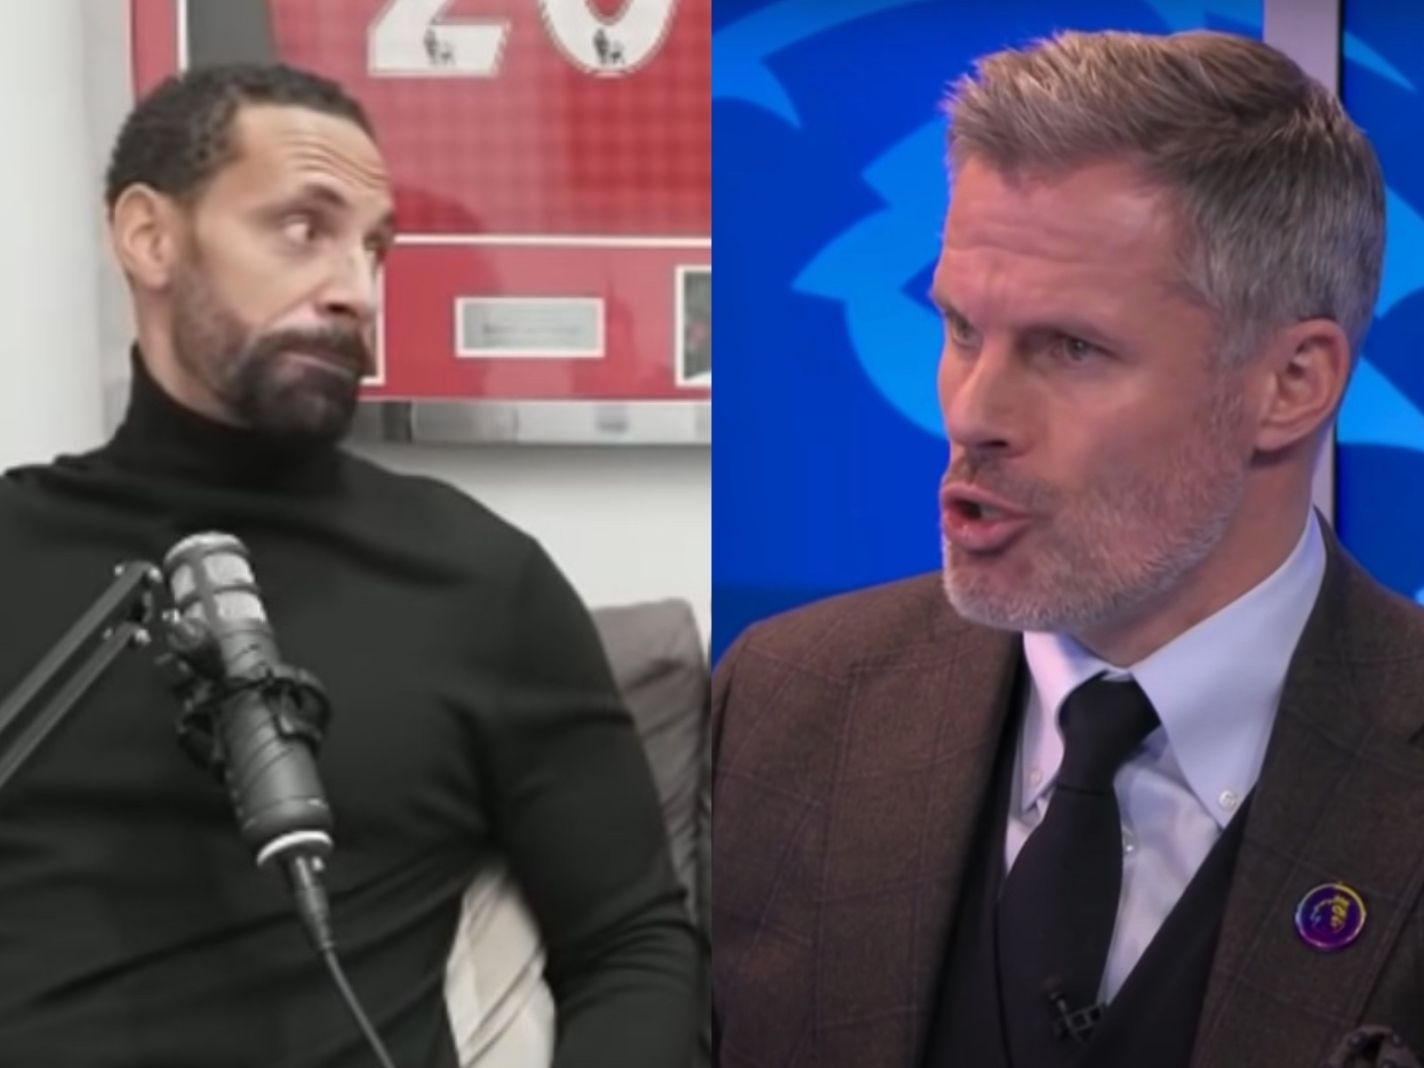 Rio Ferdinand and Jamie Carragher were involved in a heated Twitter debate